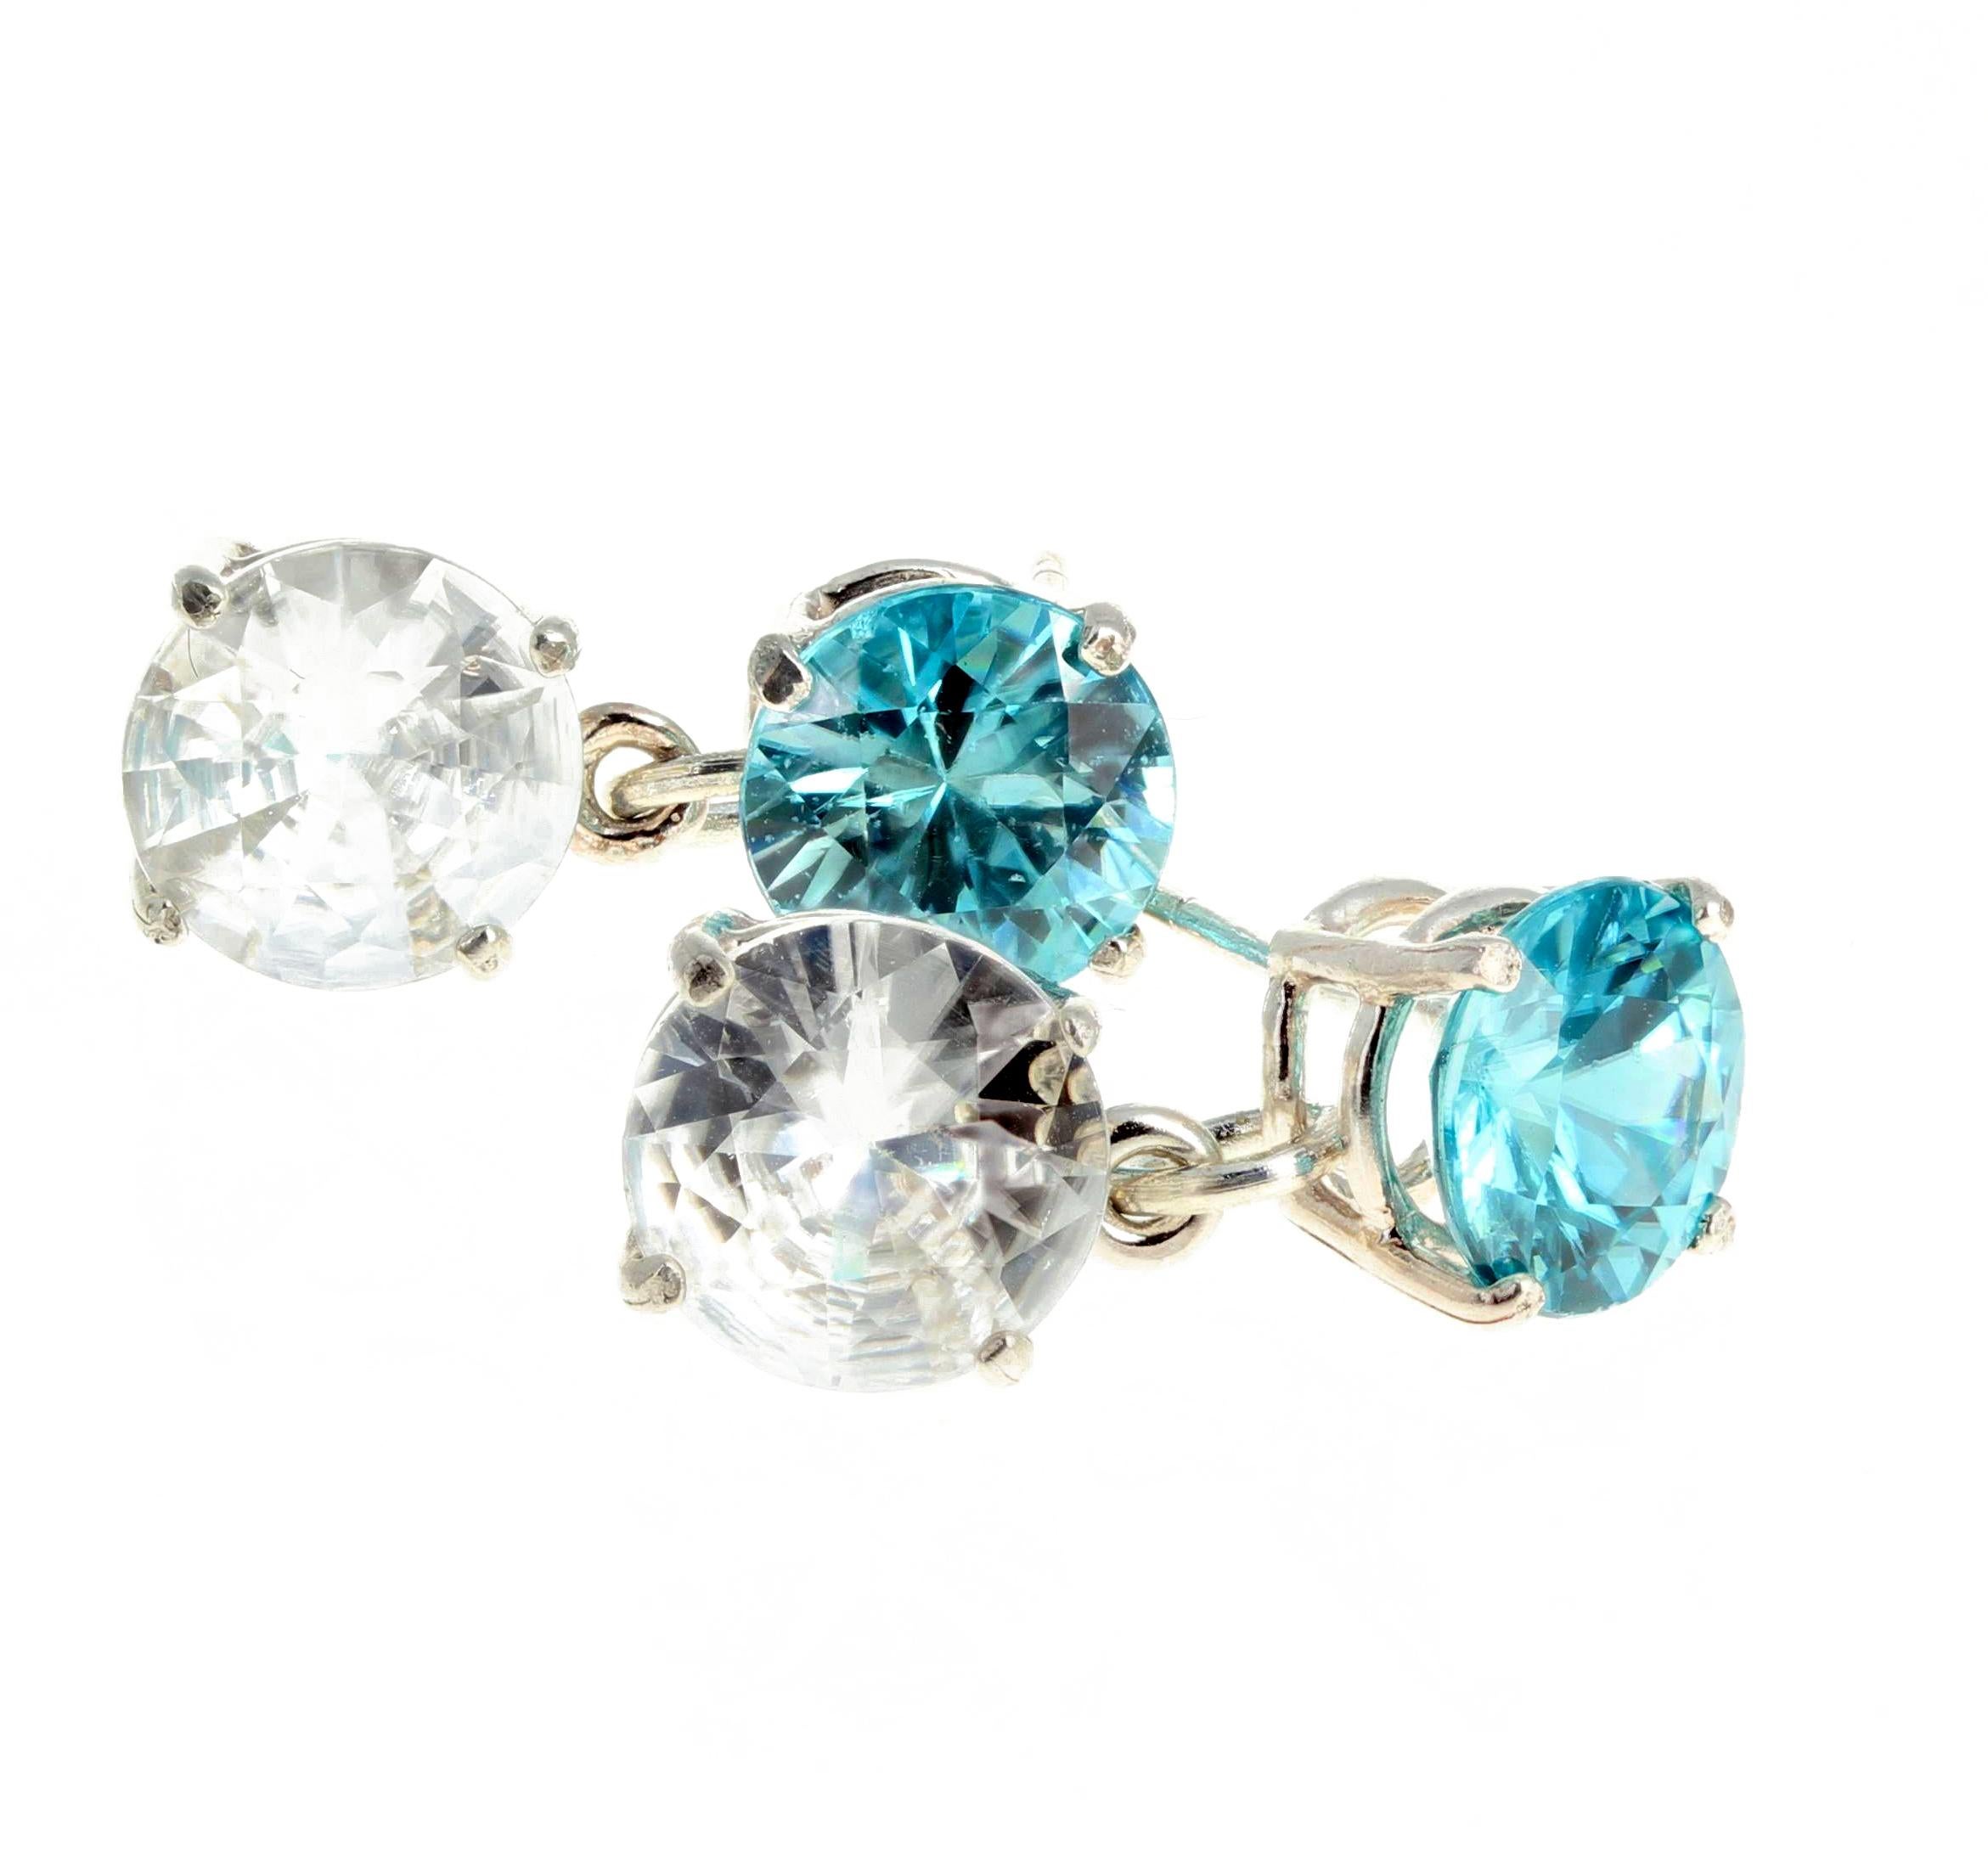 AJD Stunning 11.69Cts of Blue & White Zircons Sterling Silver Stud Earrings 1